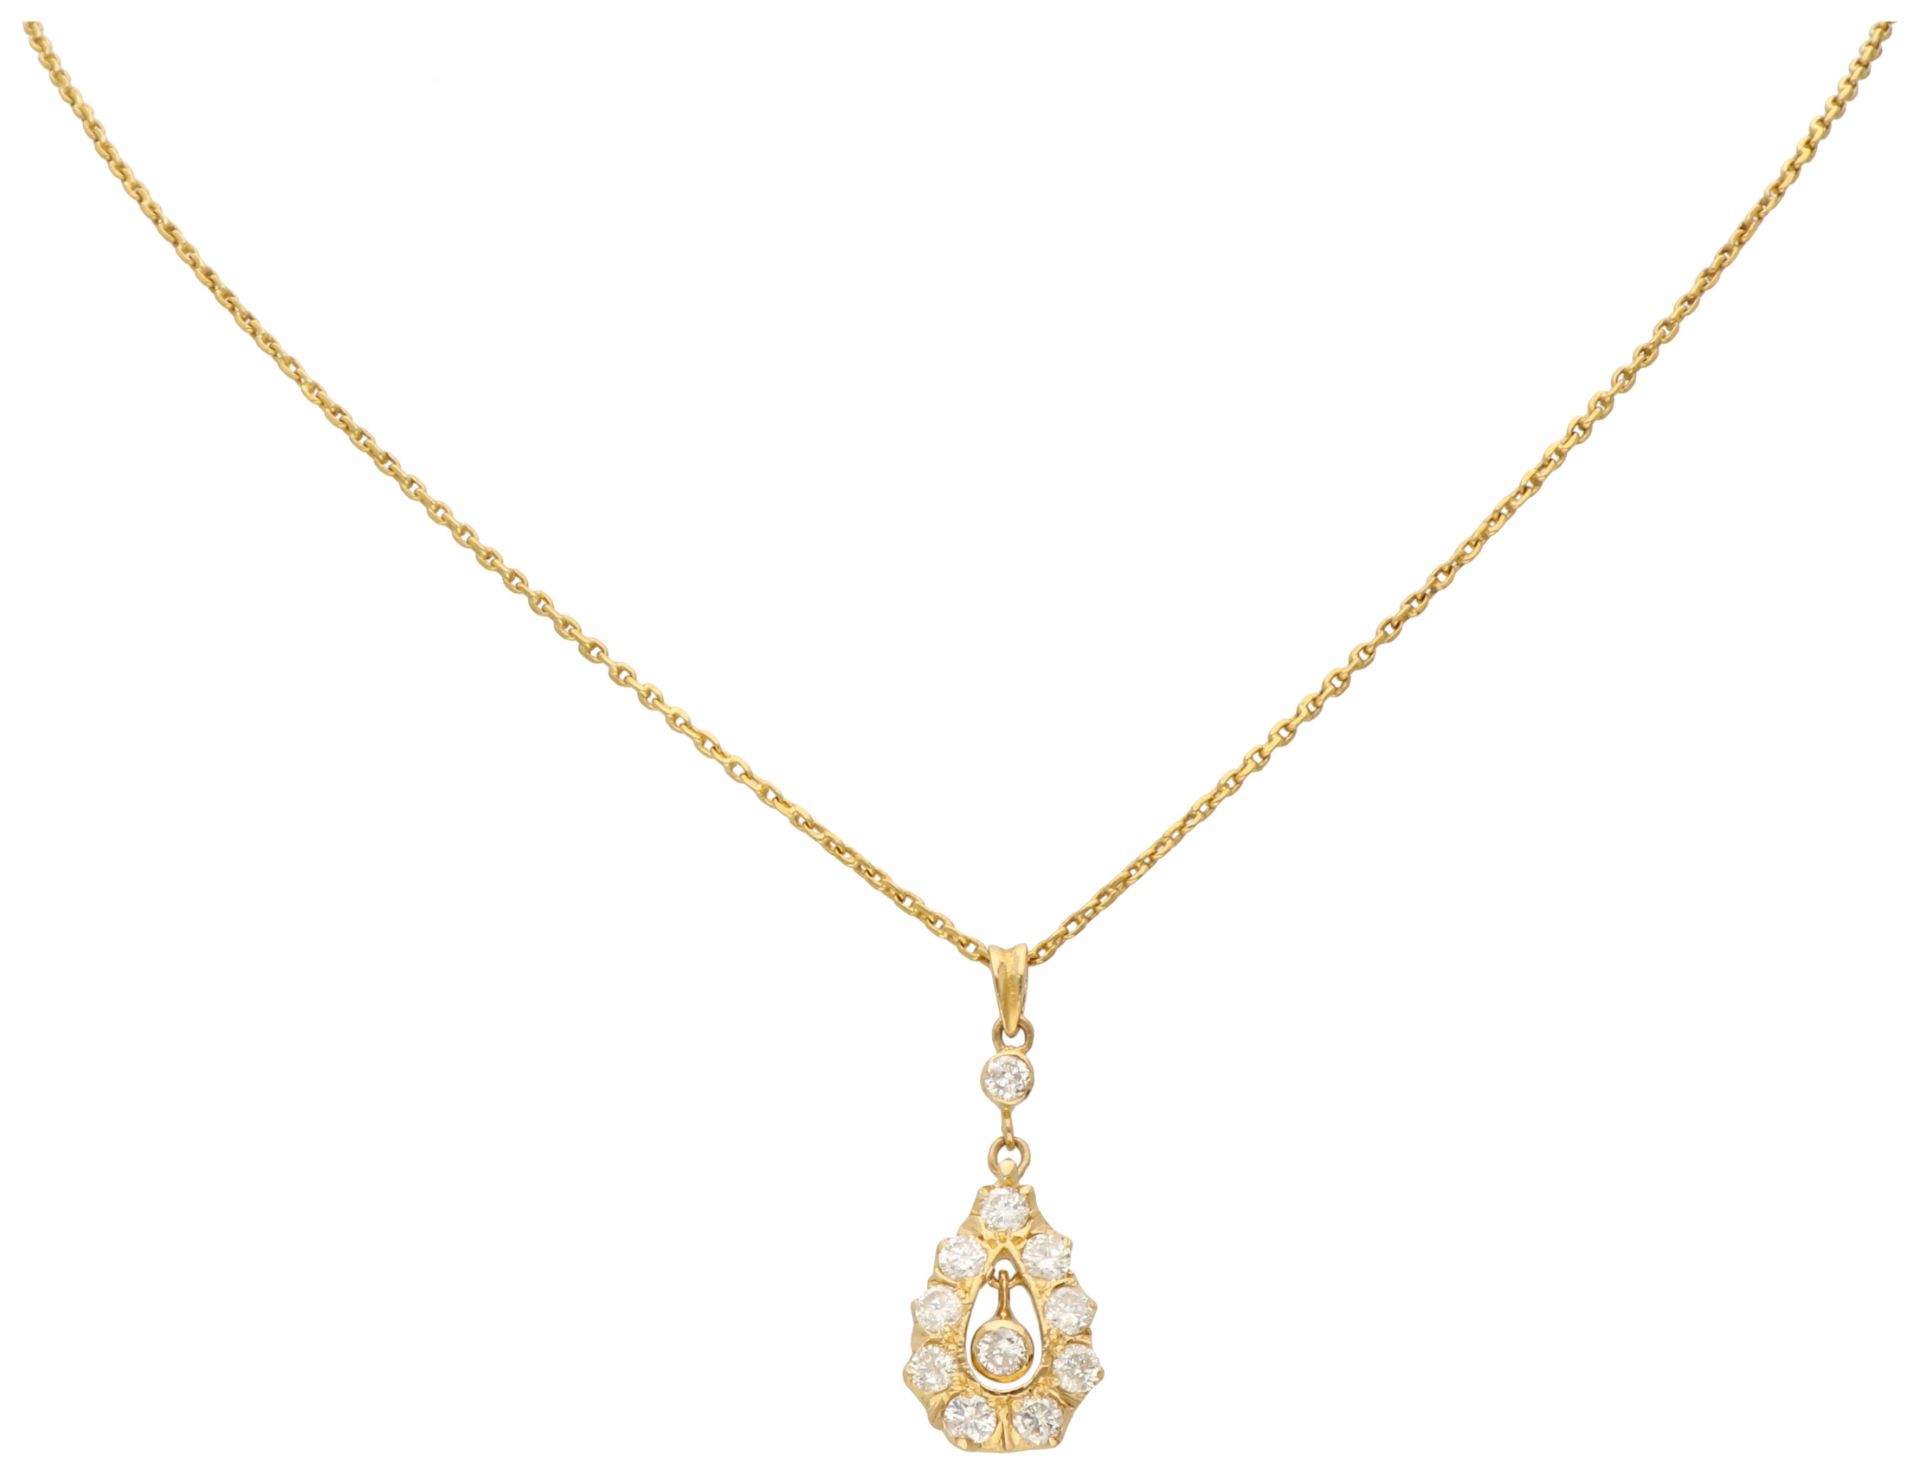 No reserve - 18K Yellow gold necklace with pendant set with approx. 0.55 ct. diamond.